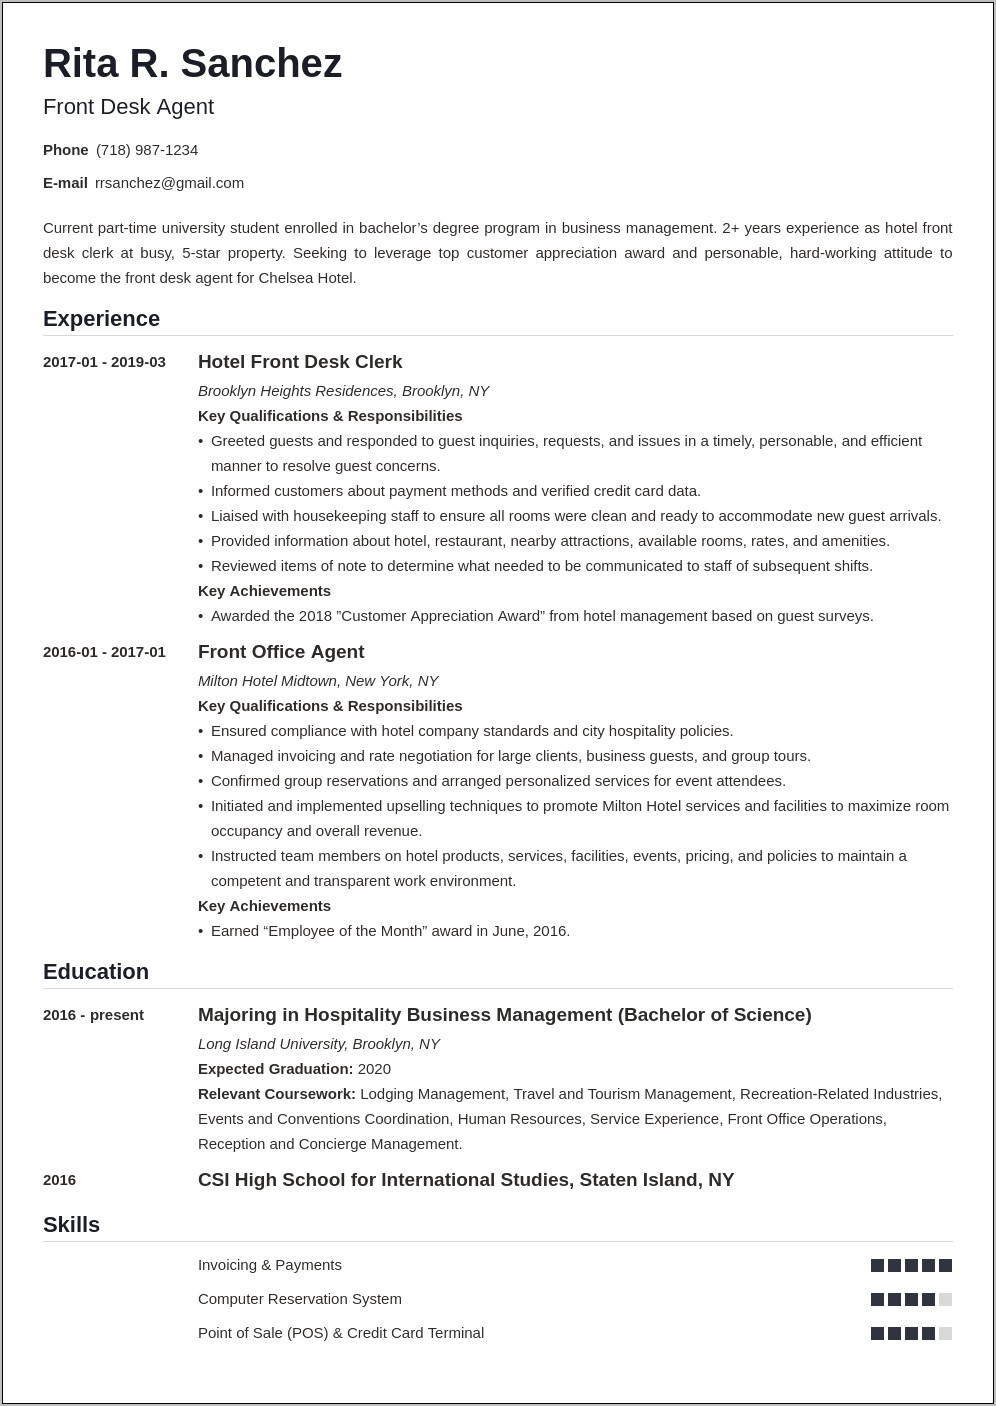 Sample Resume For Hotel Receptionist With No Experience